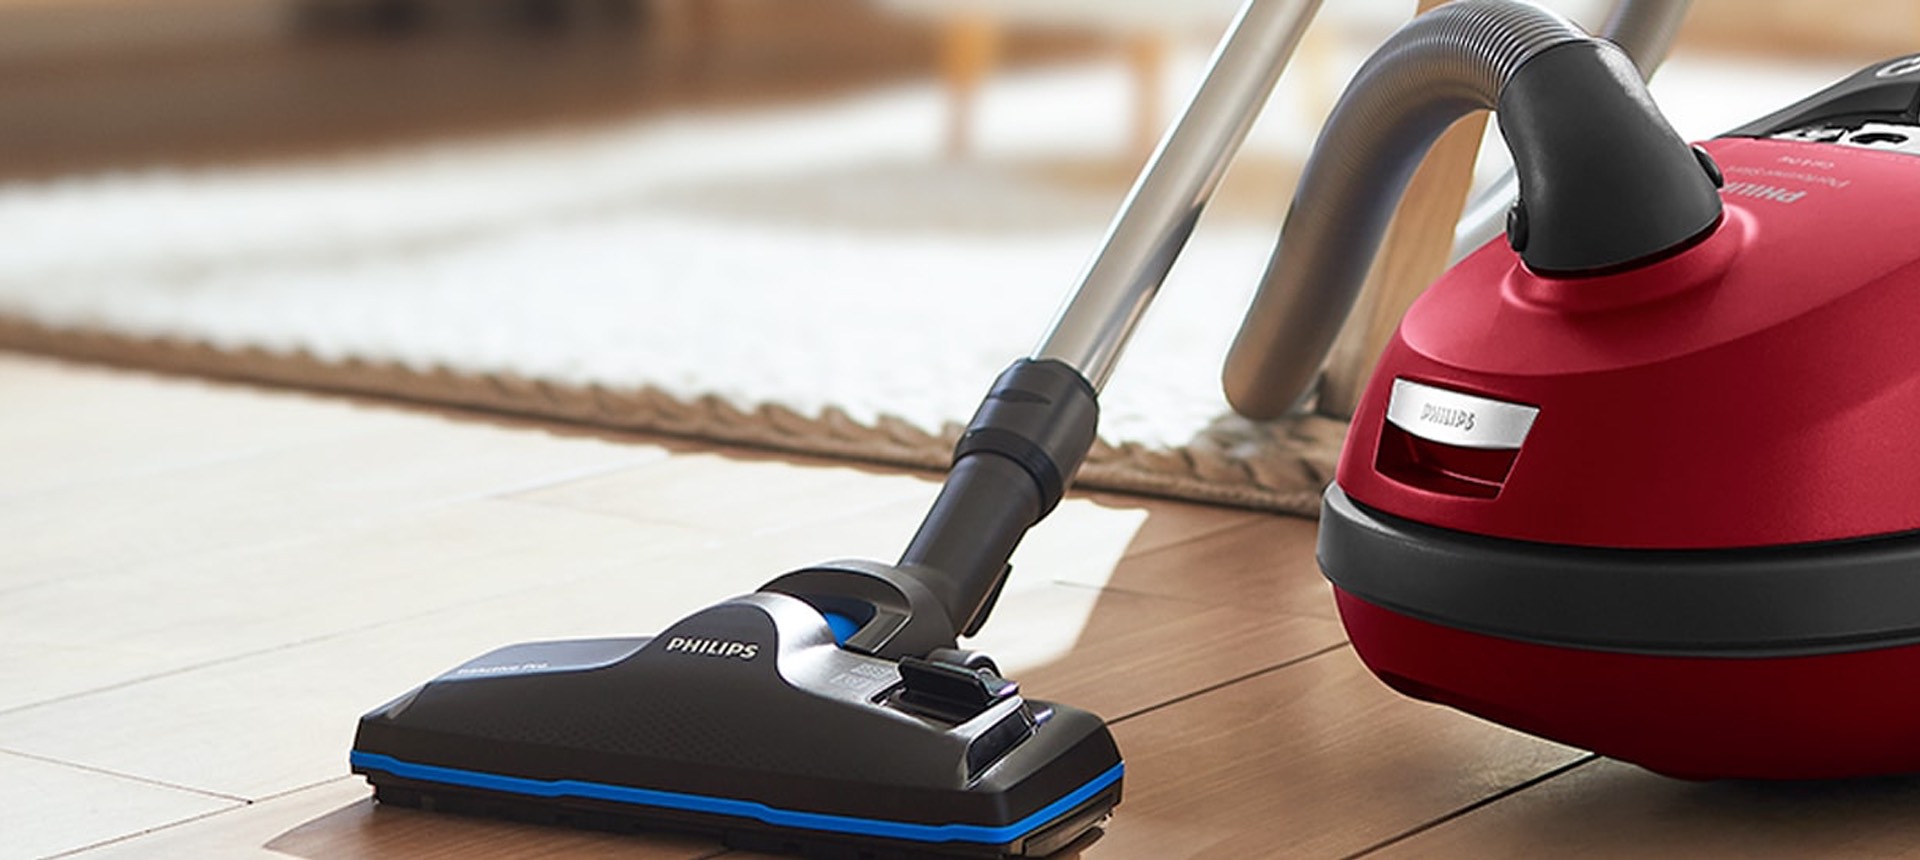 Vacuum Cleaner Store, Top Vacuum Cleaner On Sale, Best Vacuum Cleaner for Your Home